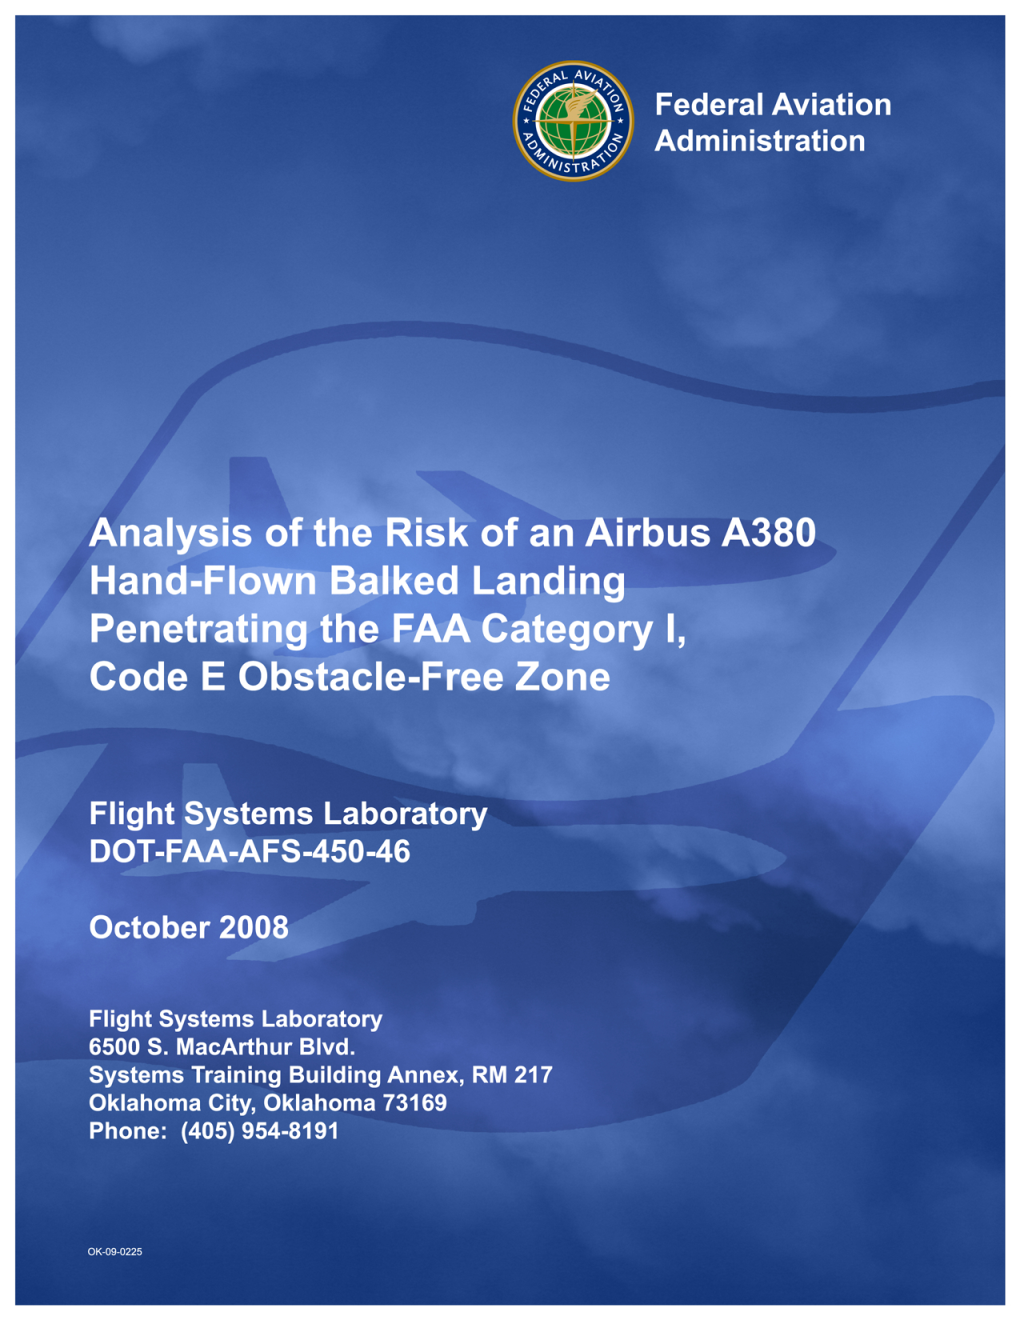 Analysis of the Risk of an Airbus A380 Hand-Flown Balked Landing Penetrating the FAA Category I, Code E Obstacle-Free Zone DOT-FAA-AFS-450-46 October 2008